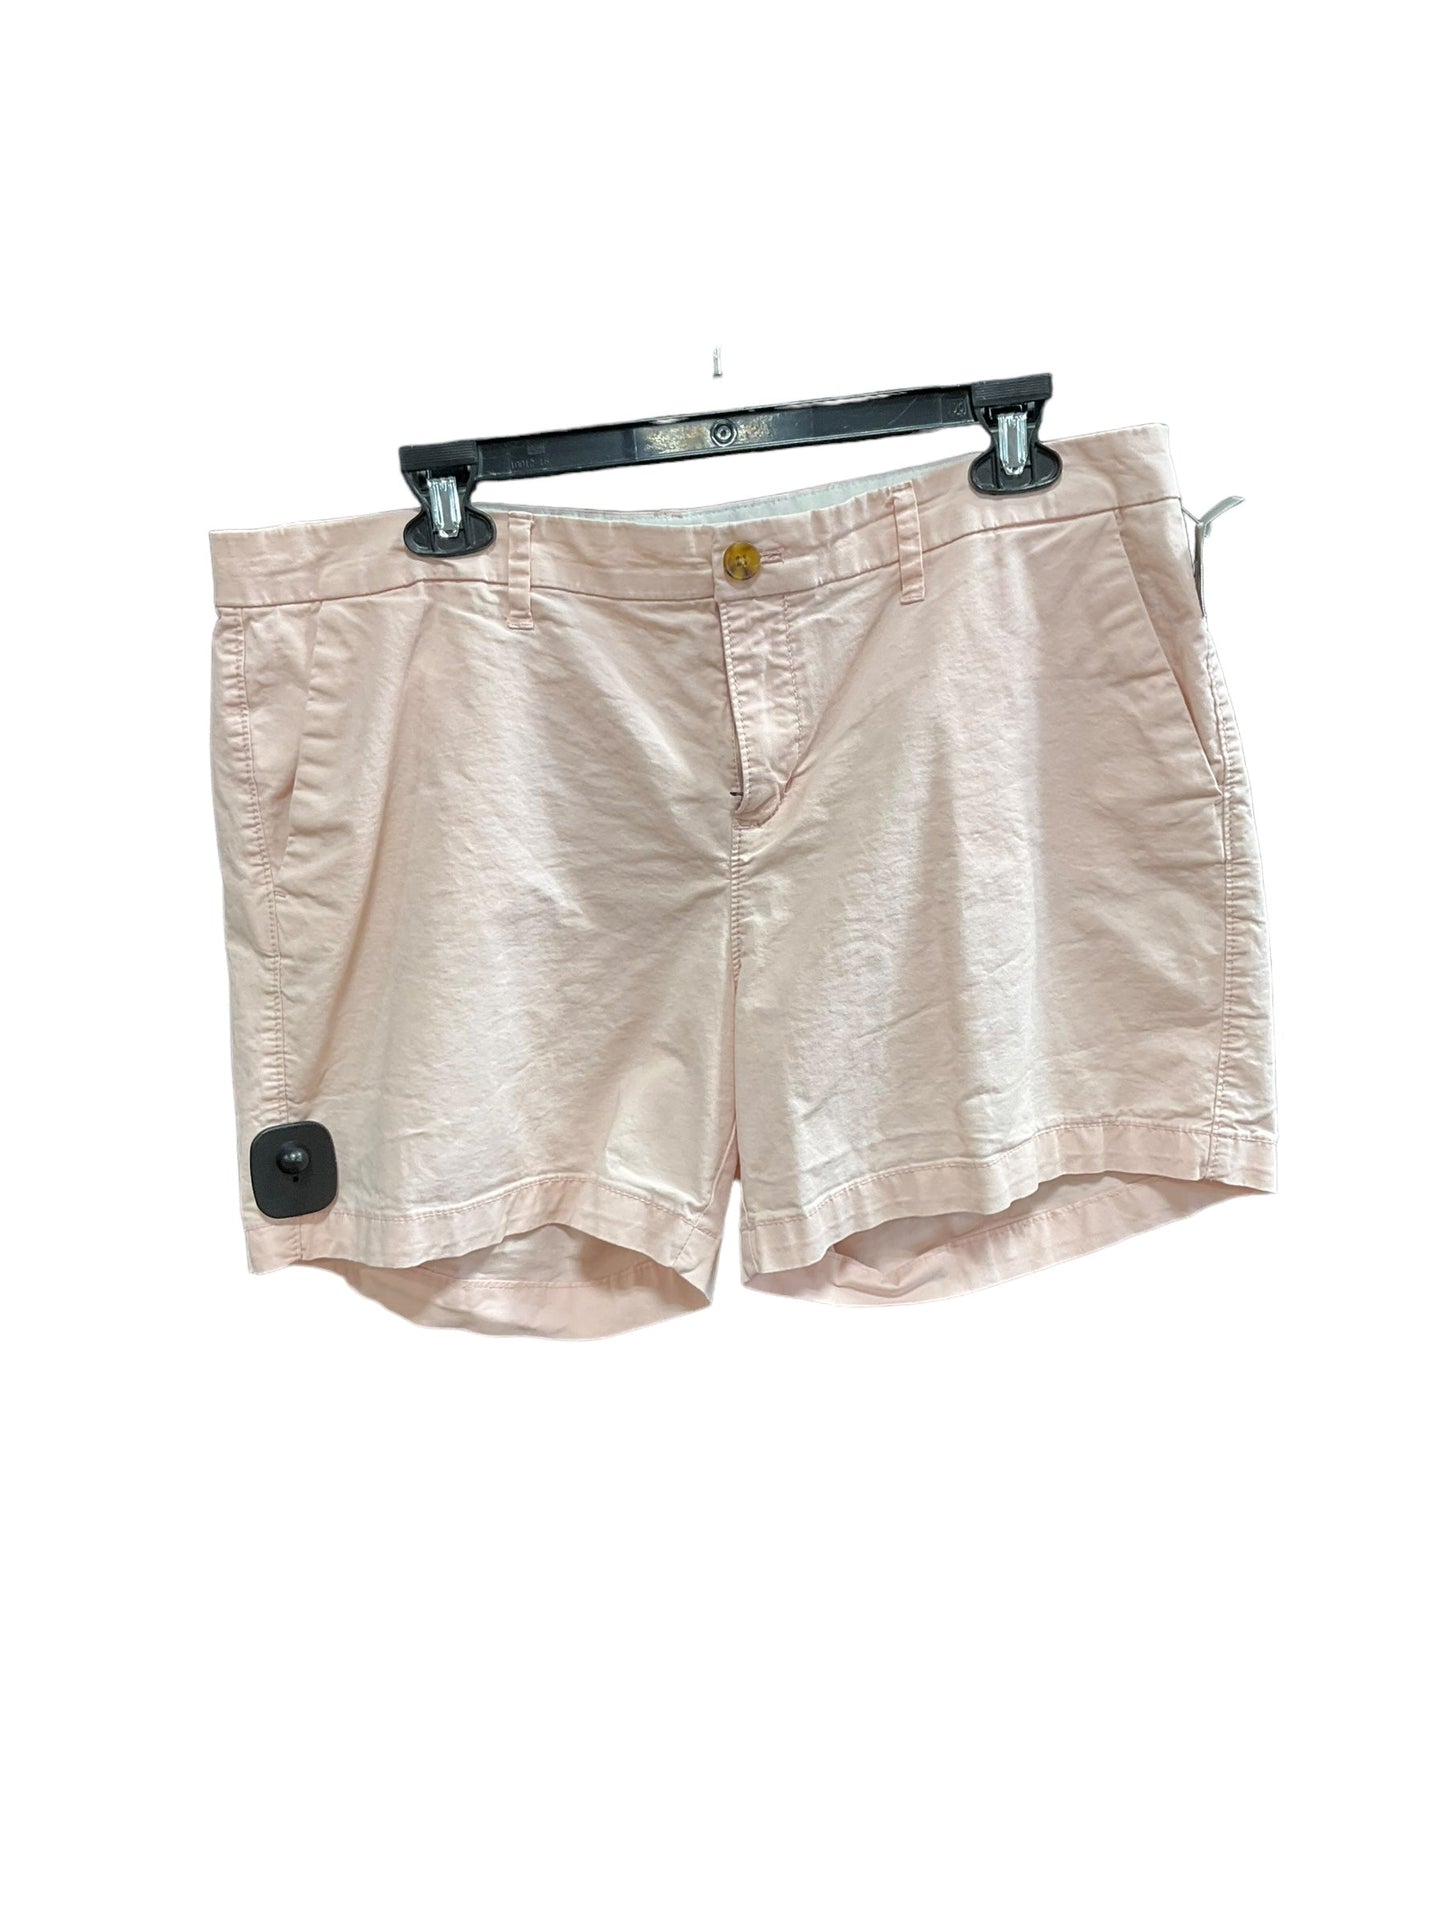 Pink Shorts Old Navy, Size L